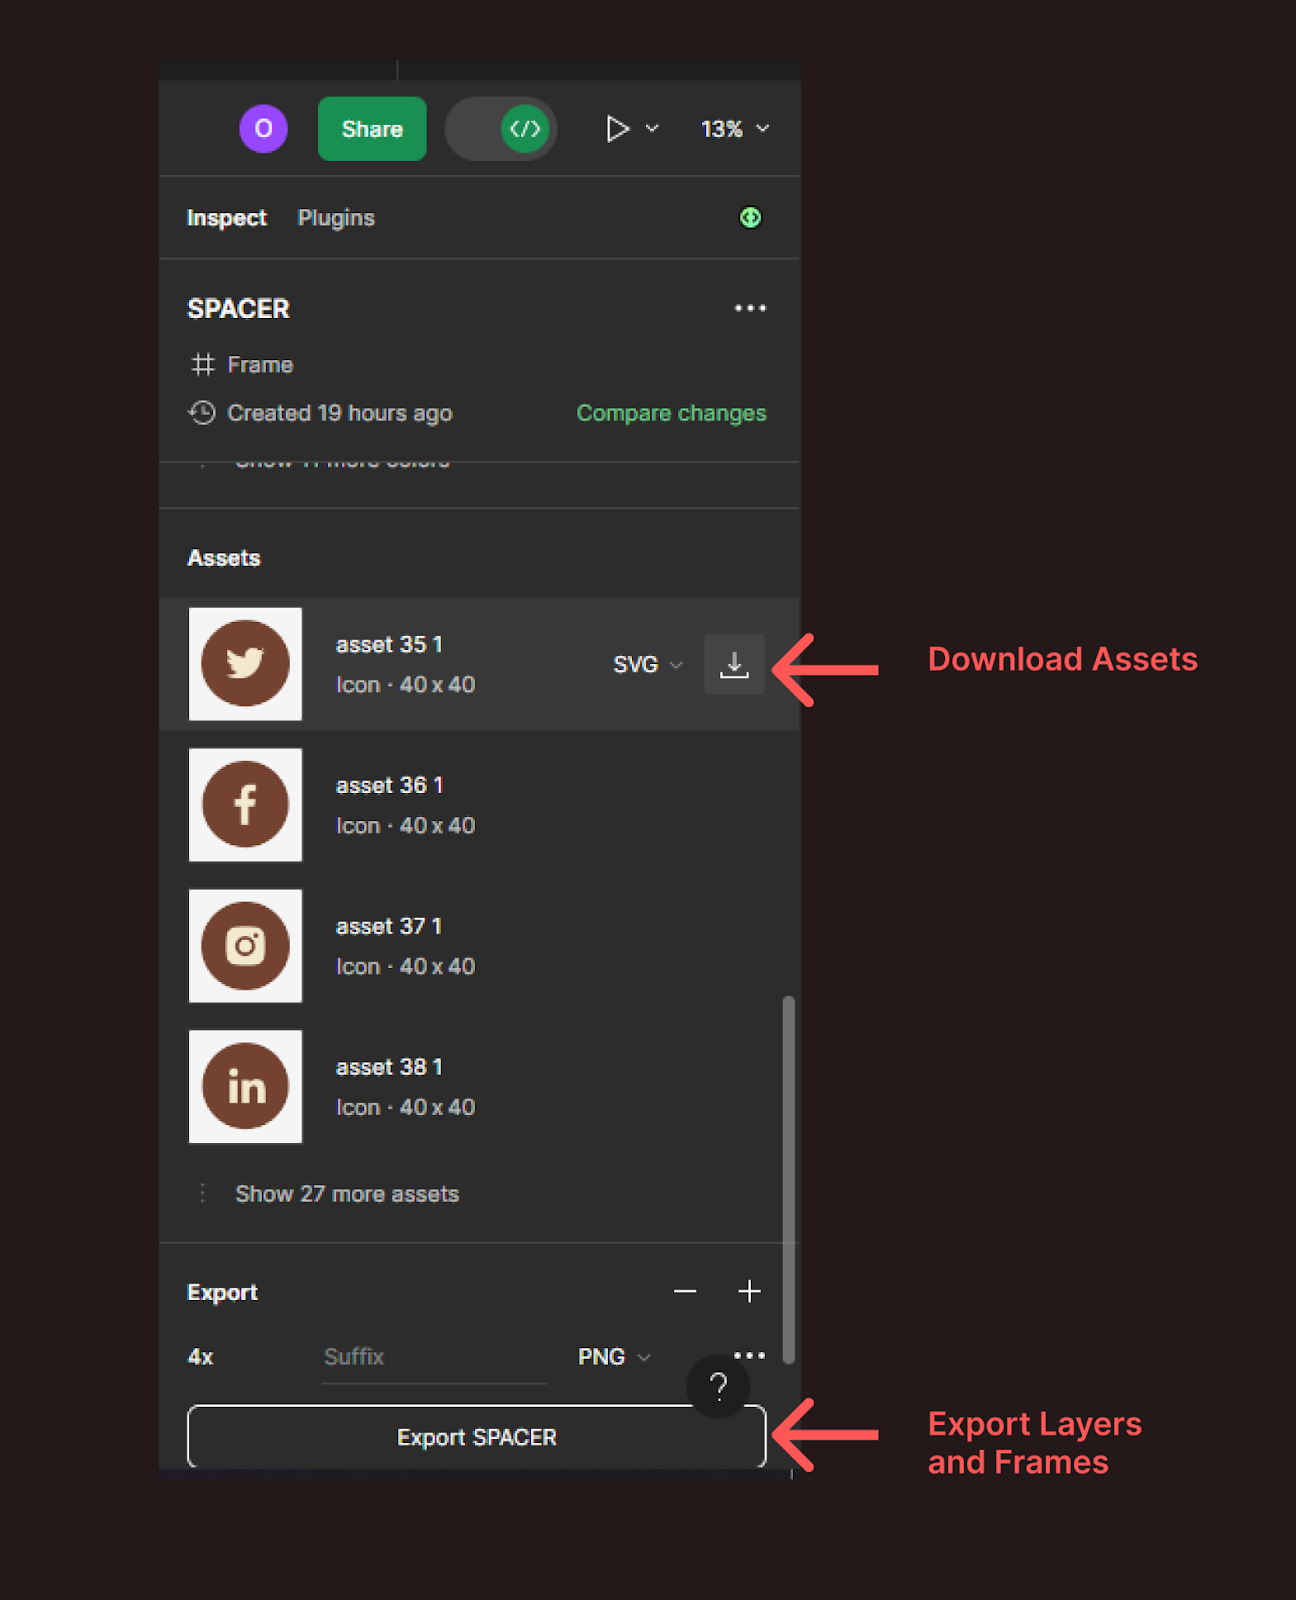 This image shows how to download assets in Dev Mode